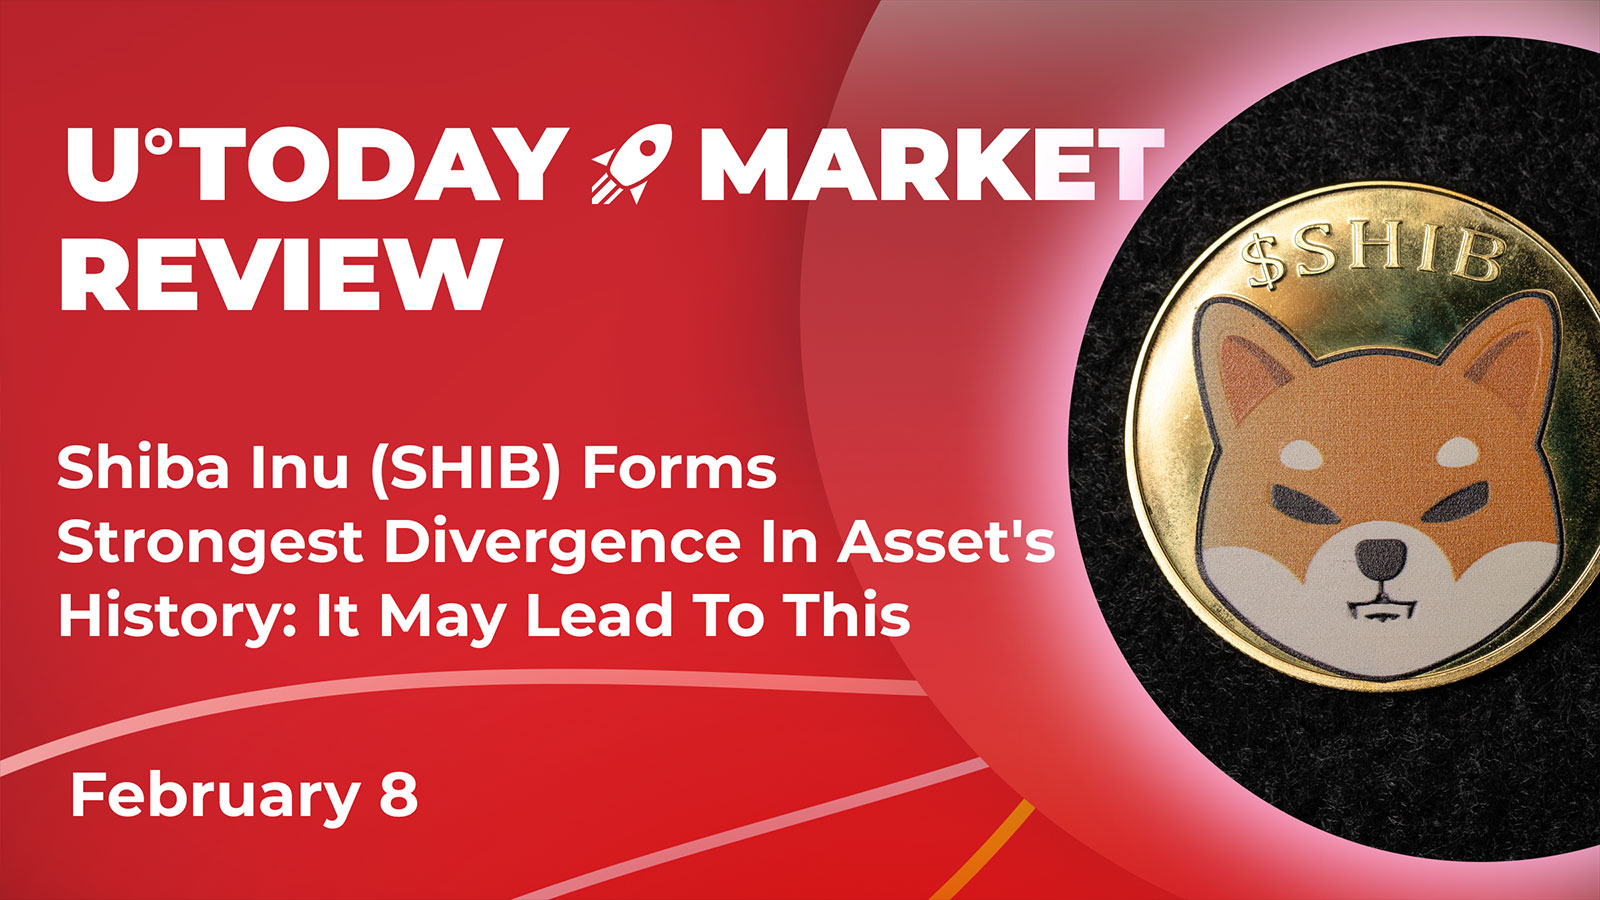 Shiba Inu (SHIB) Forms Strongest Divergence in Asset's History: It May Lead to This